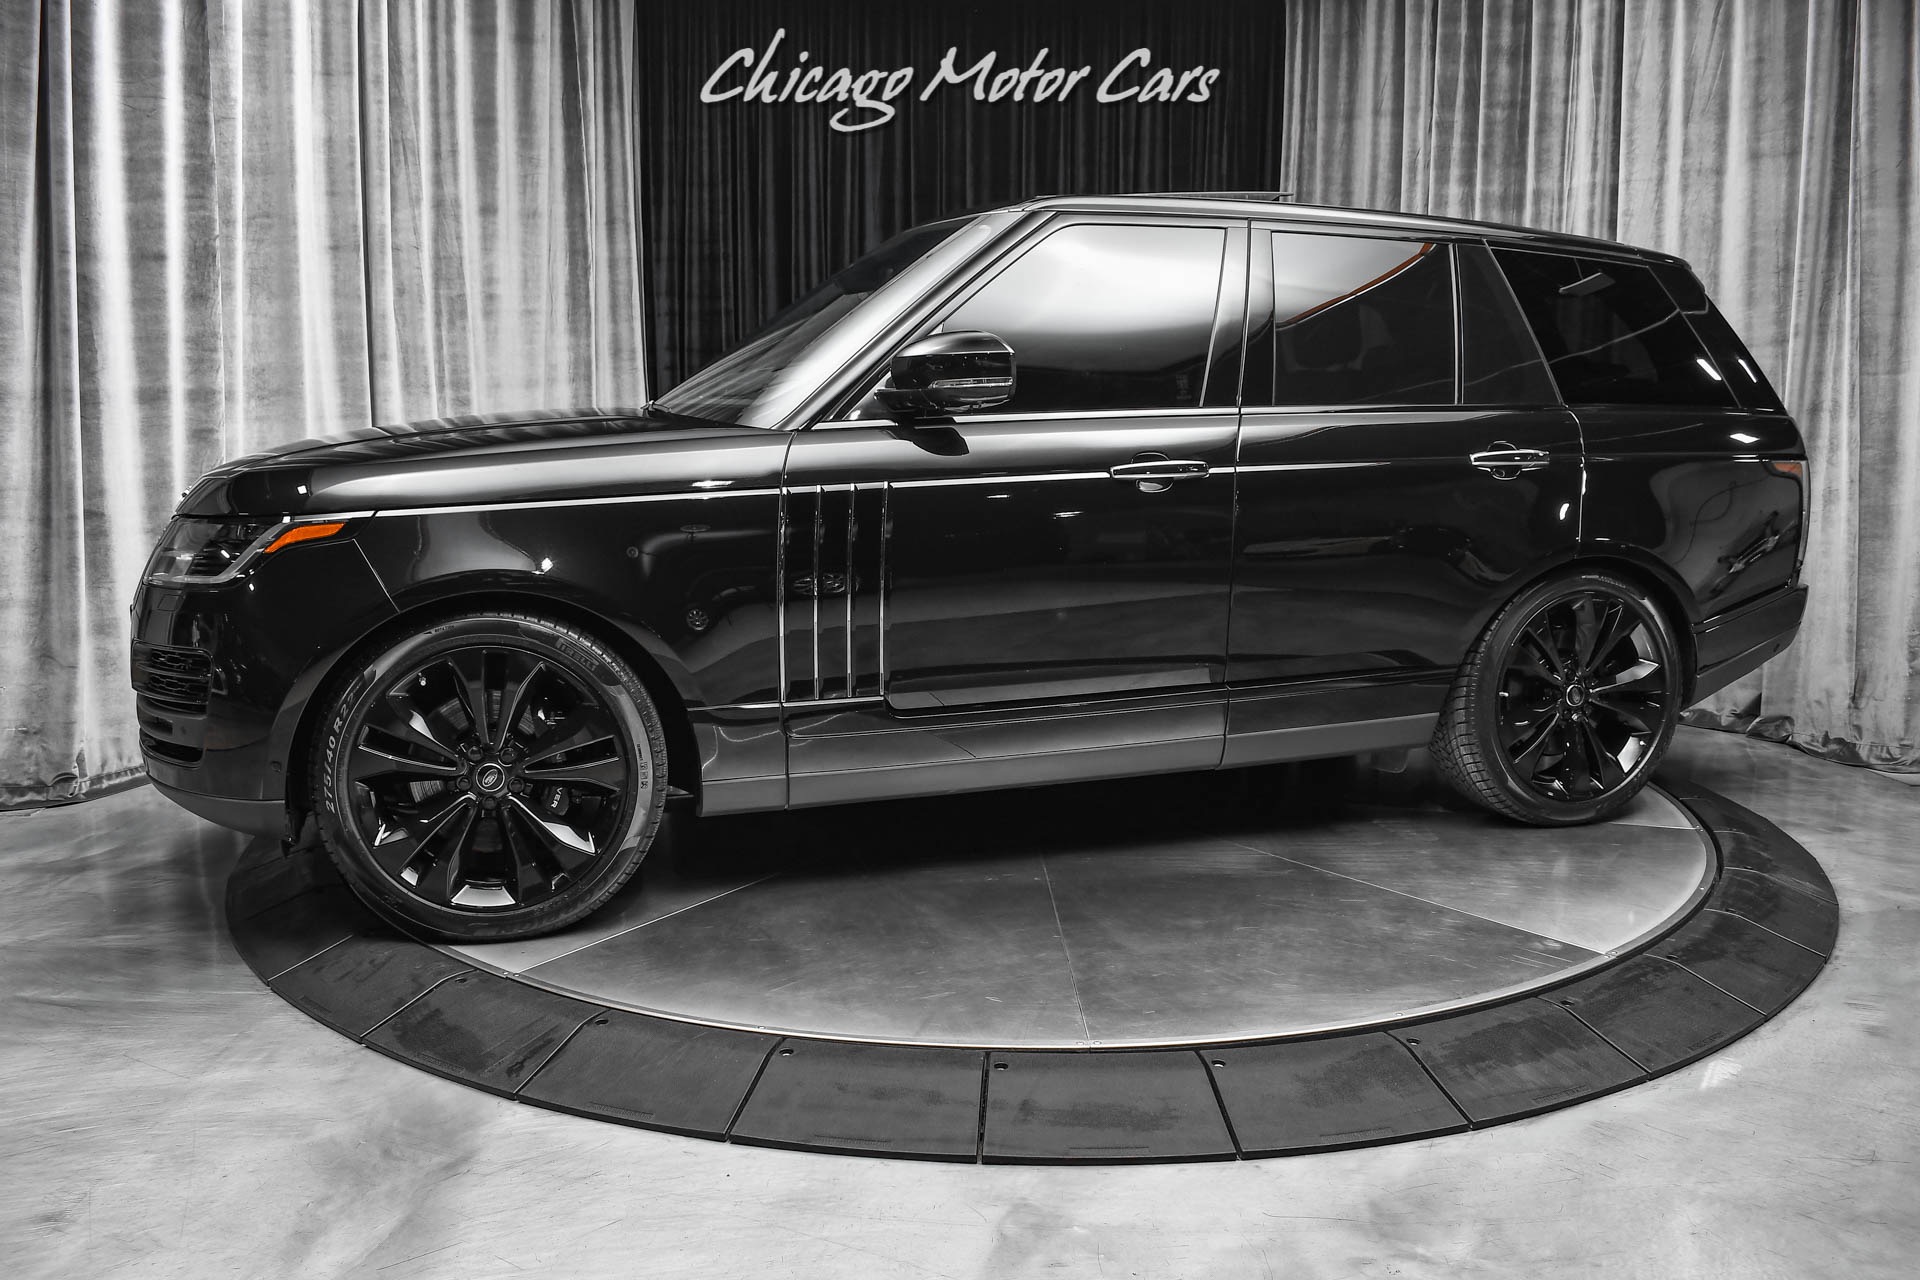 Used 2021 Land Rover Range Rover SVAutobiography Dynamic Black For Sale  (Special Pricing) | Chicago Motor Cars Stock #18931